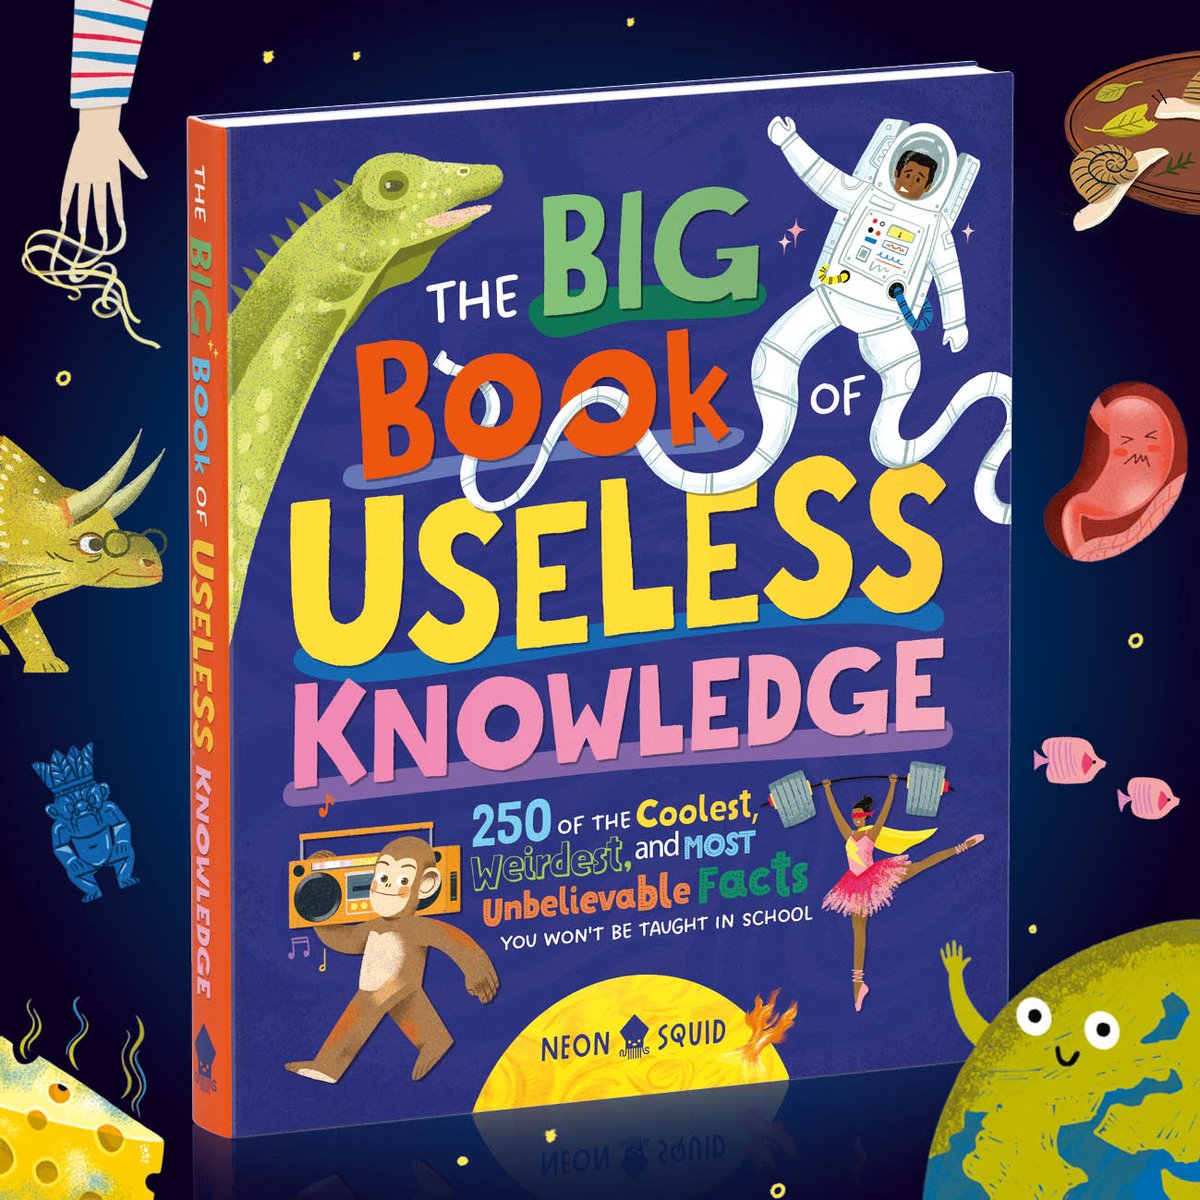 🔔 NEW BOOK ALERT 🔔 We’re thrilled to announce this encyclopaedia of mind-boggling random facts! Heard about the lizard that shoots blood from its eyes? Or the ancient Romans who used pee as mouthwash? Did you know that going on a roller coaster can cure kidney stones? 🦎🎢🤯